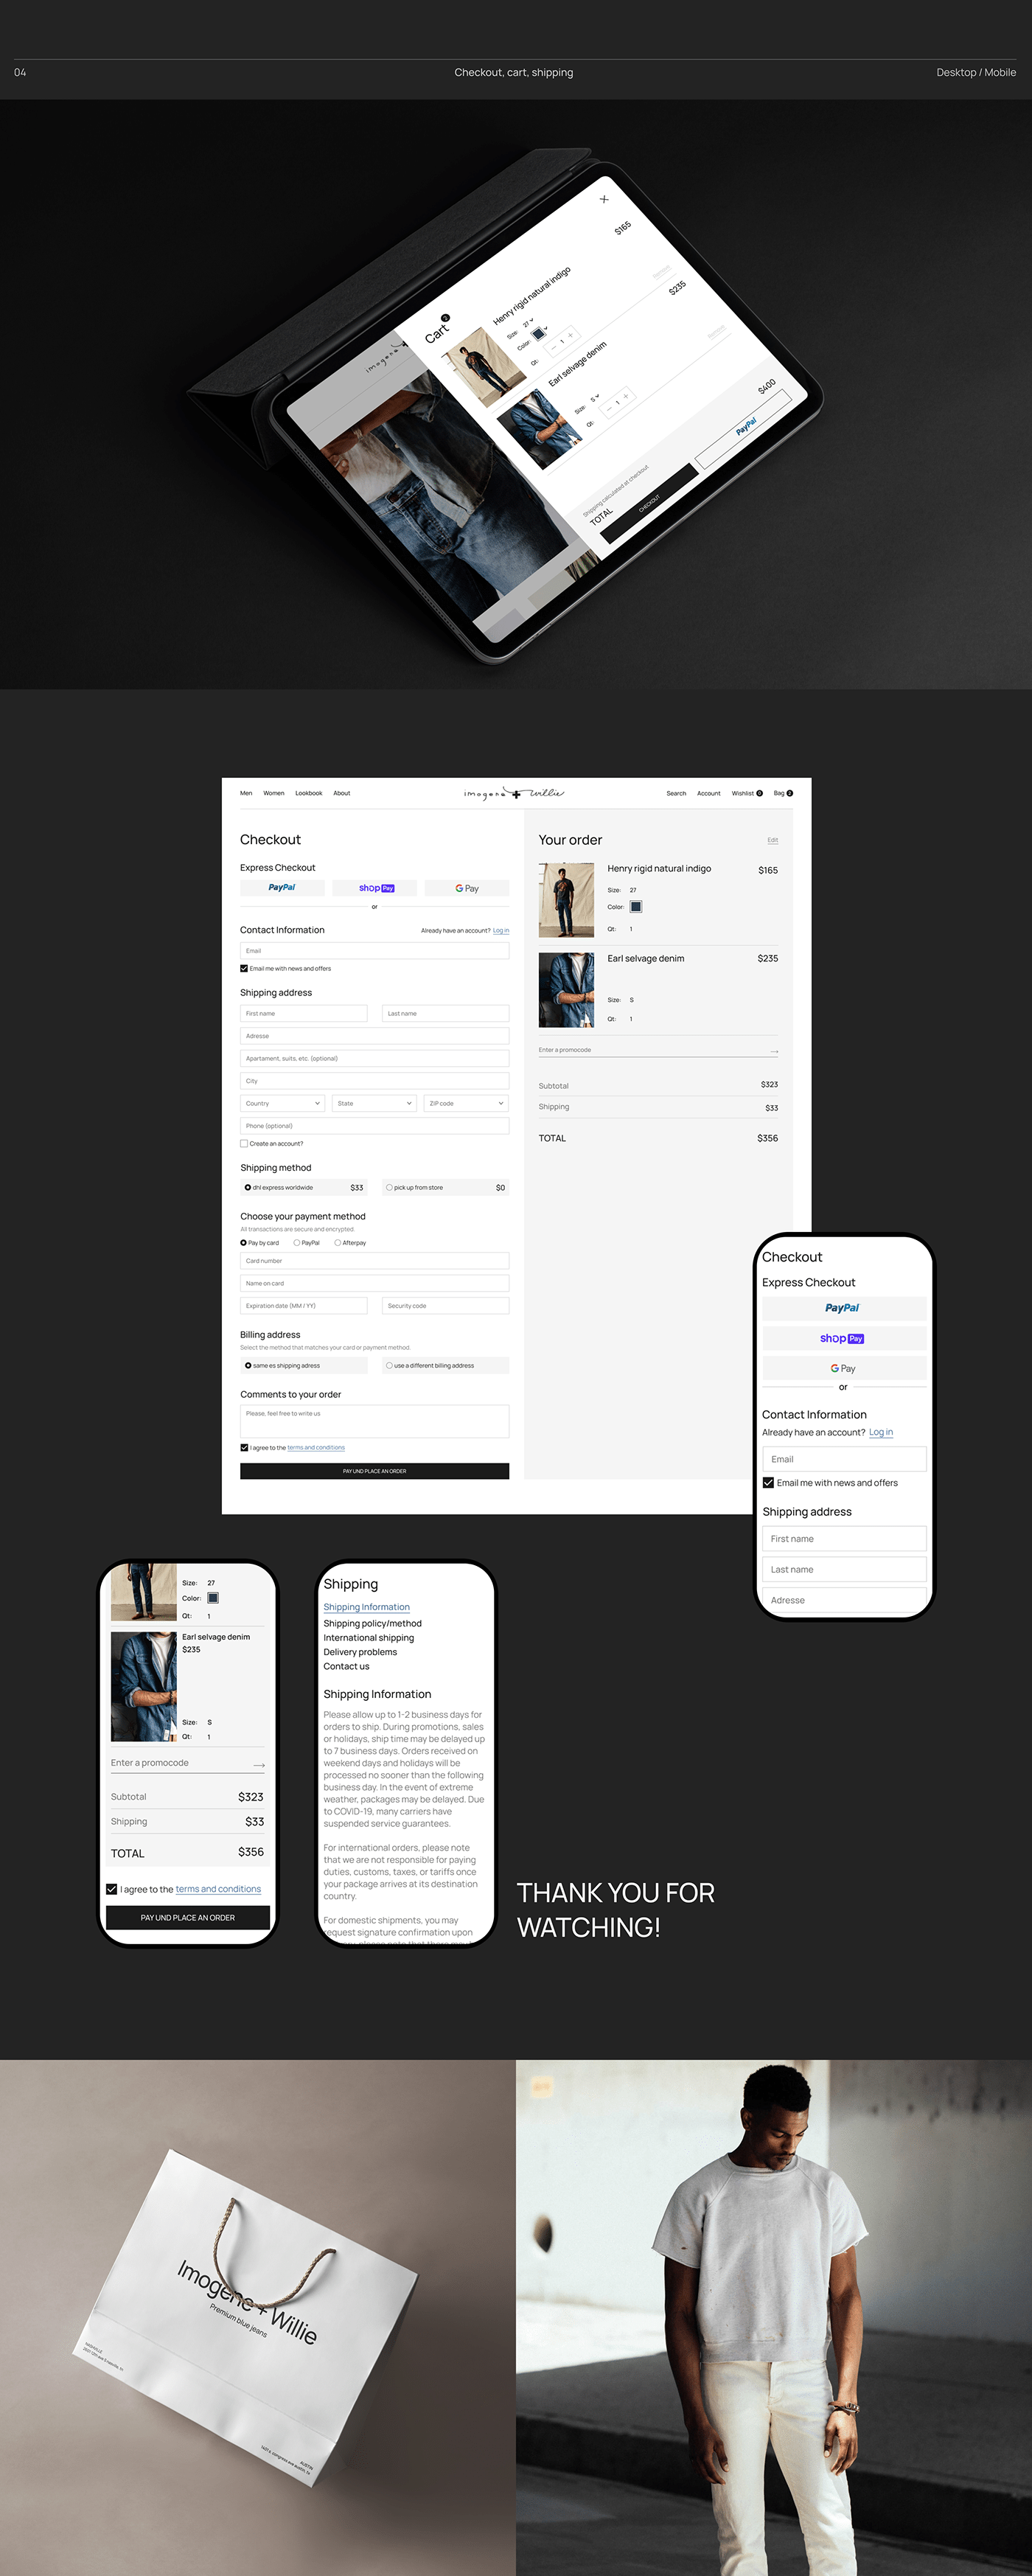 Clothing e-commerce Ecommerce jeans online store redesign UI/UX user interface Web Design  Website